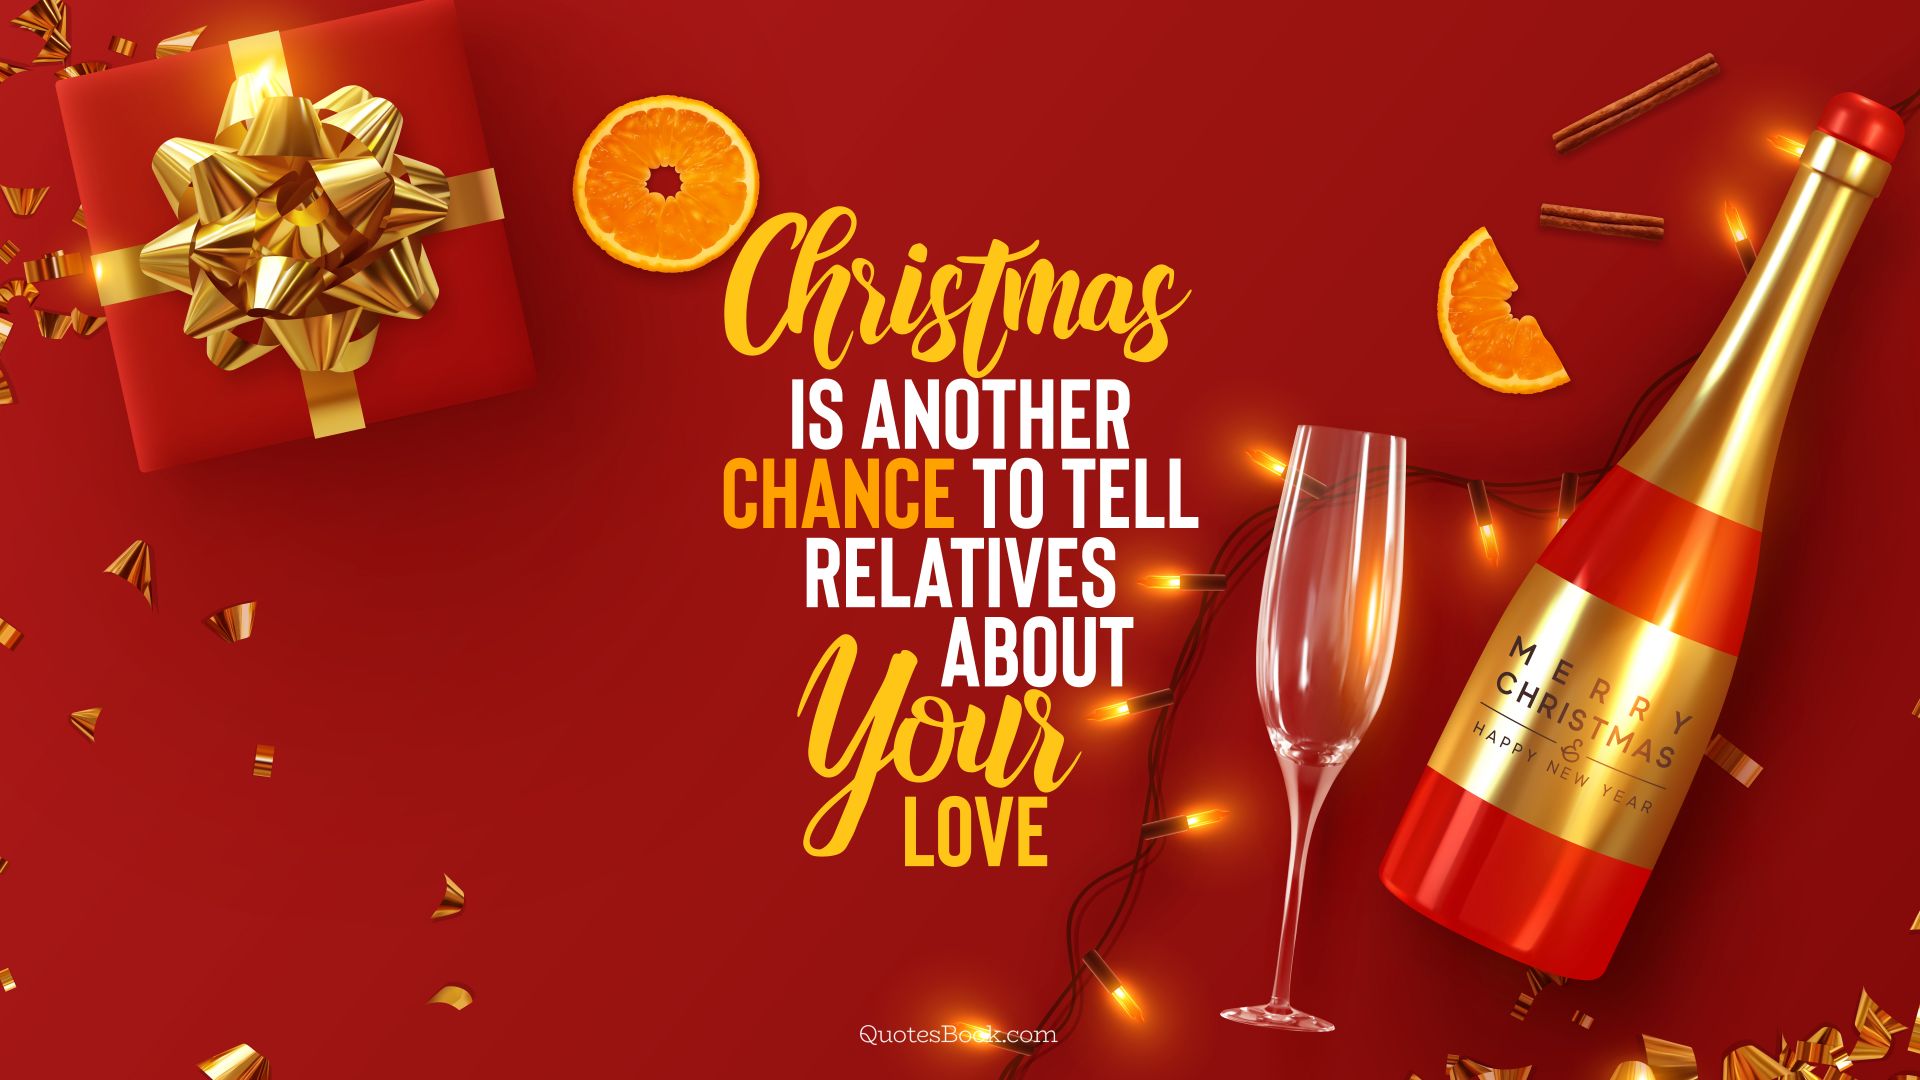 Christmas is another chance to tell relatives about your love. - Quote by QuotesBook